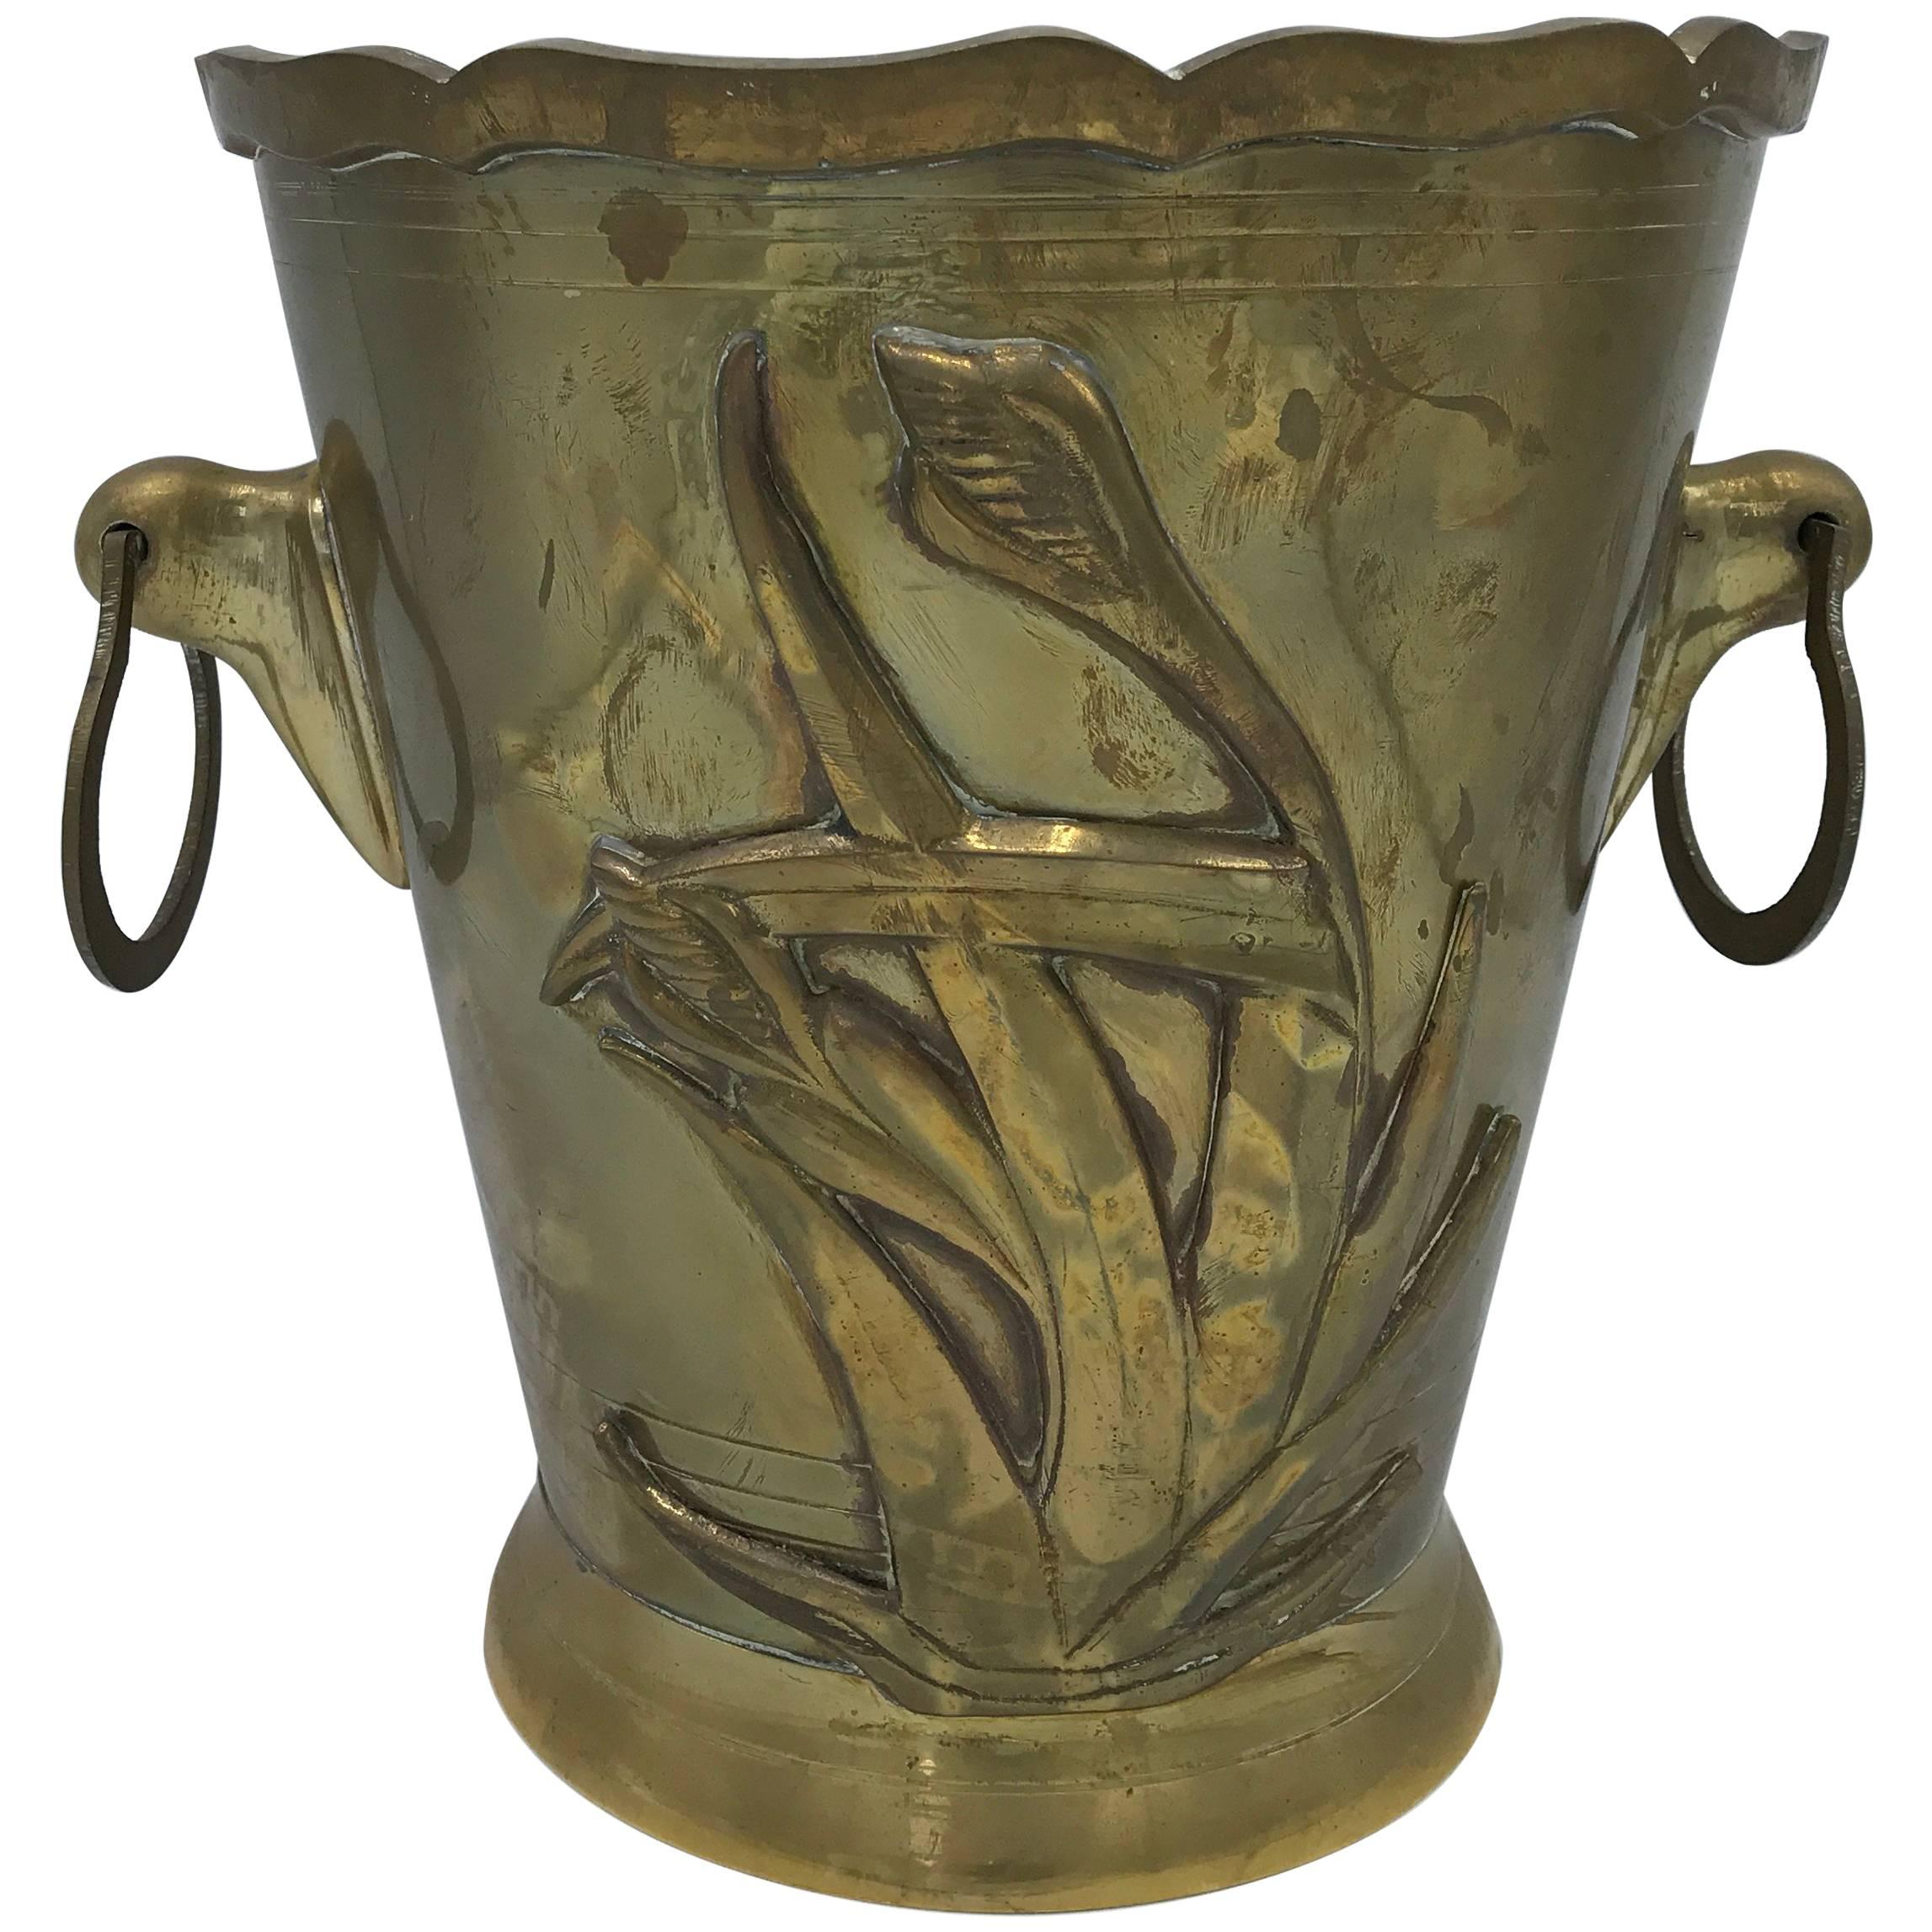 1970s Brass Waste Basket with Tulip Floral Motif and Handles